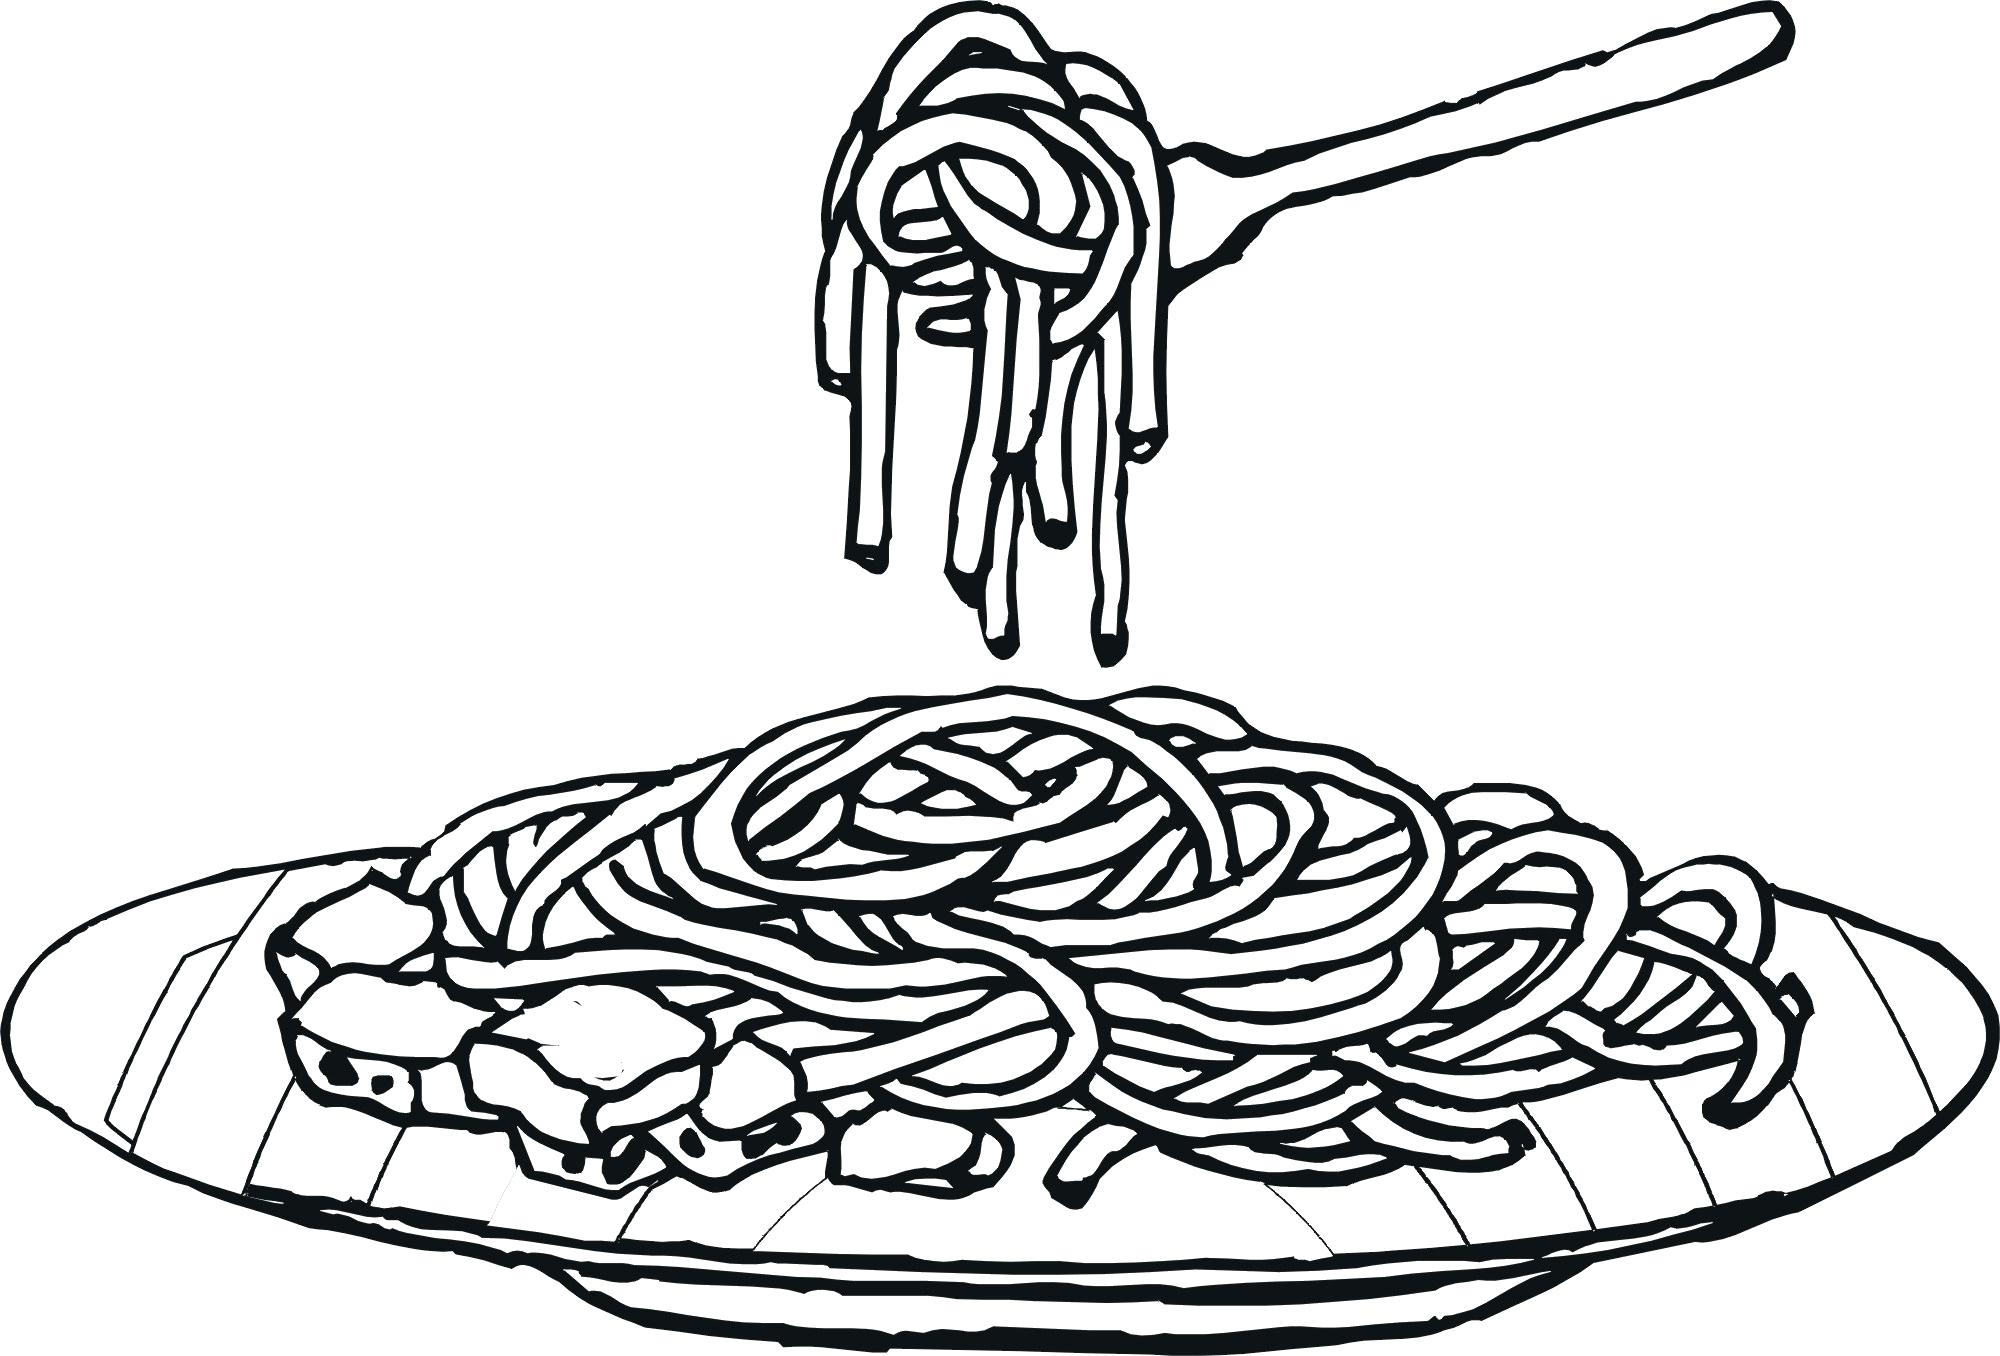 Pasta clipart colouring, Pasta colouring Transparent FREE for ...